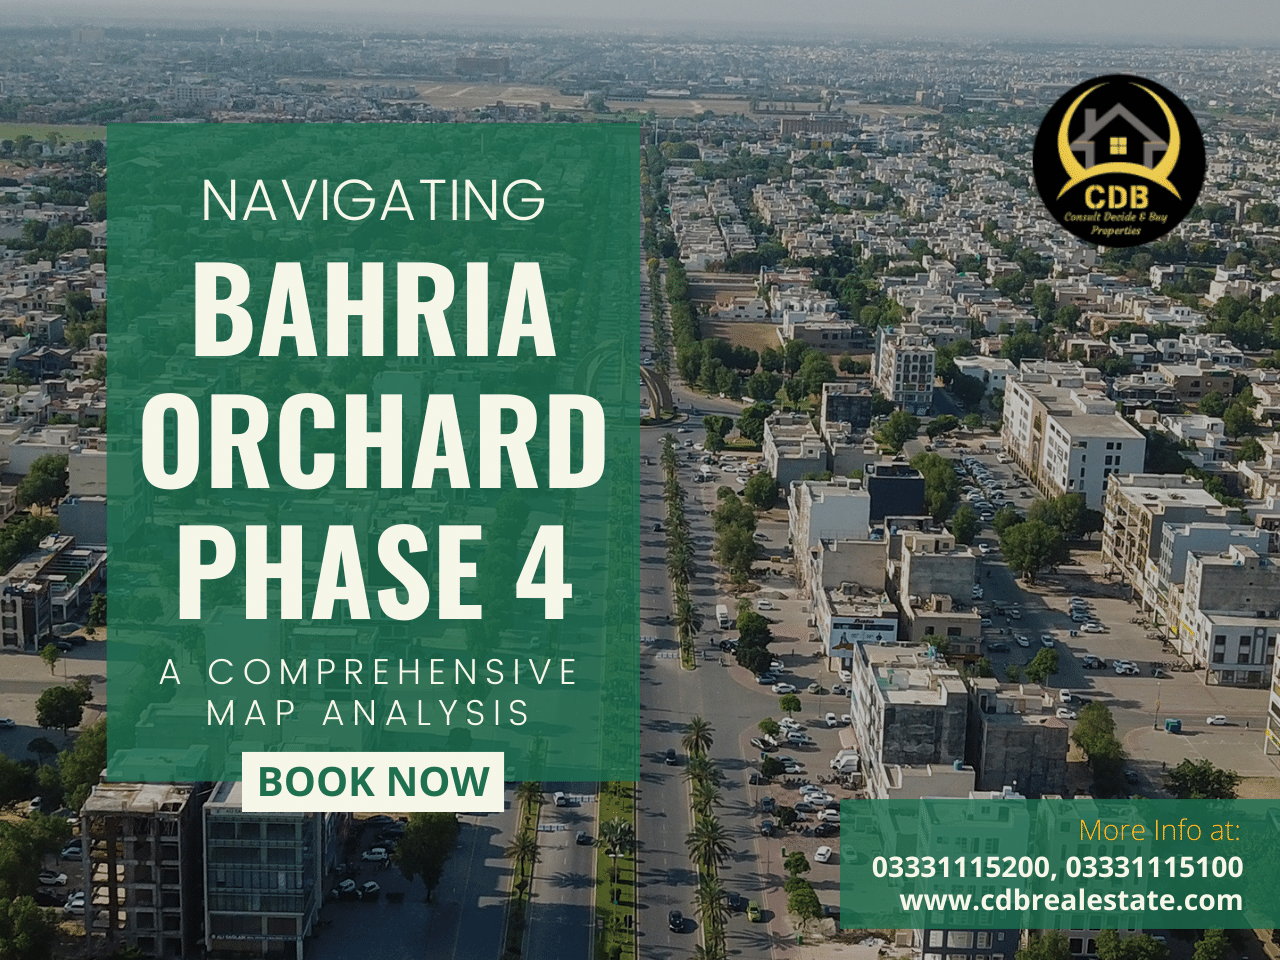 Bahria Orchard Phase 4 Map Analysis